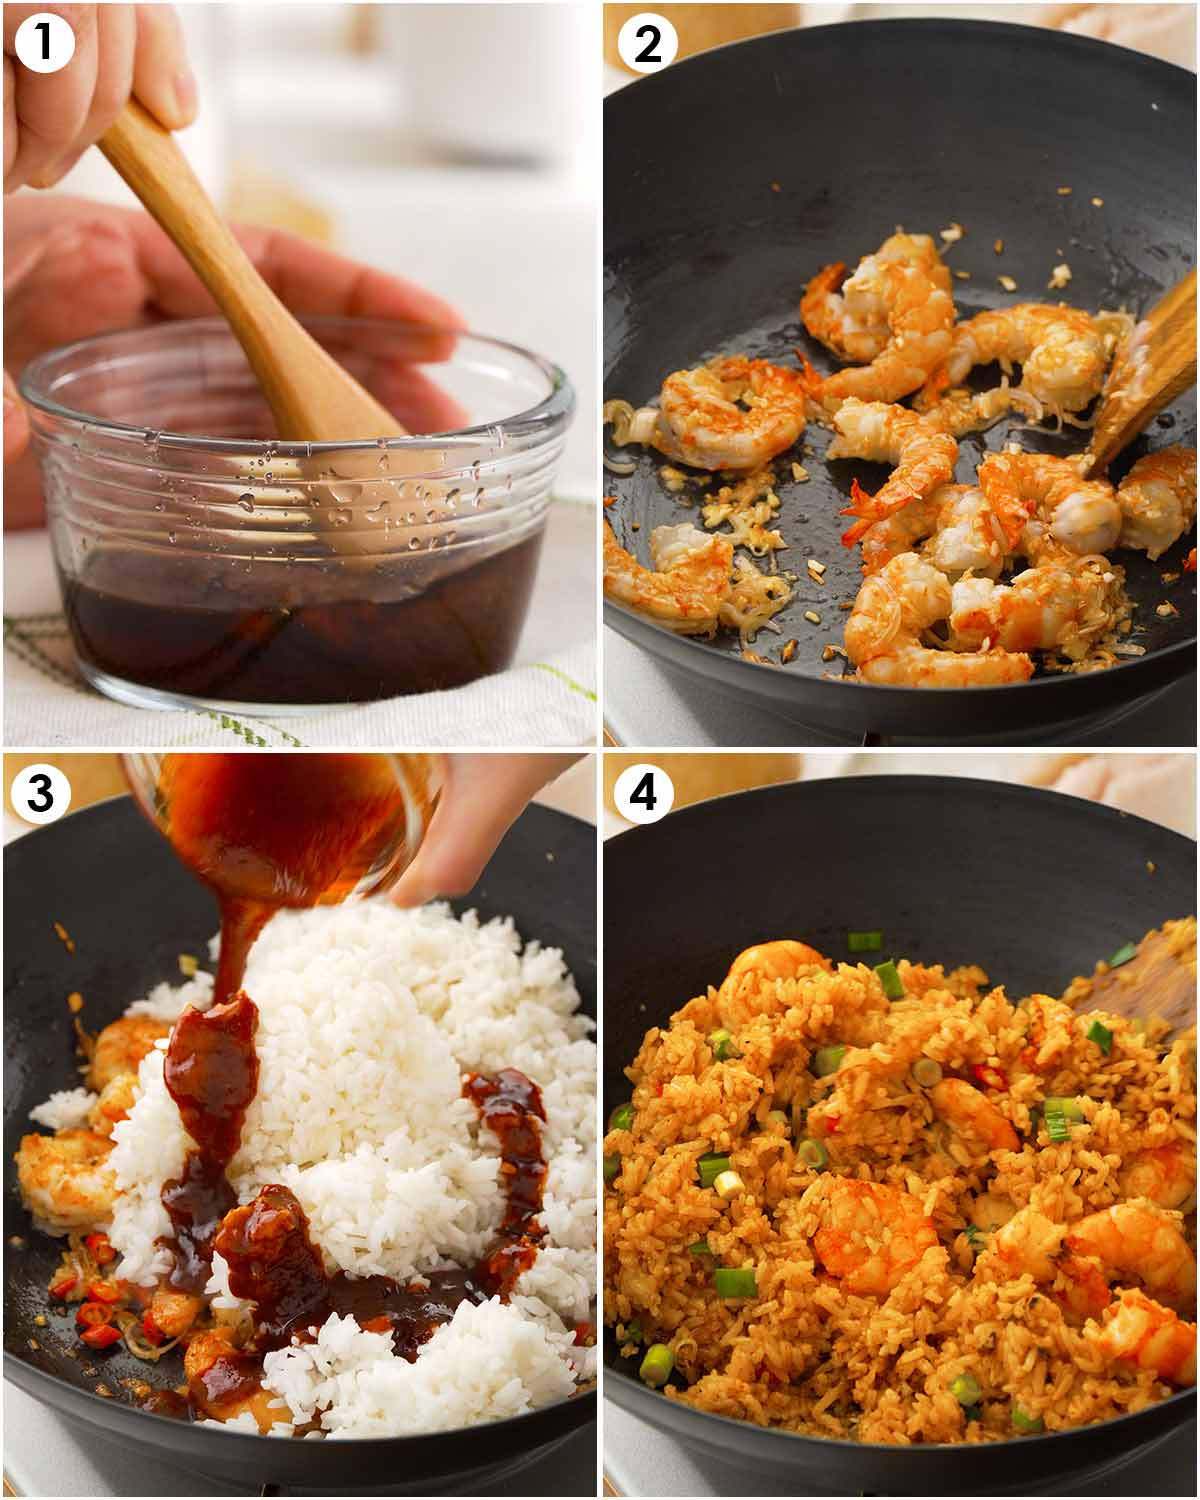 4 image collage showing how to prepare fried rice and how to stir fry it in the wok. 